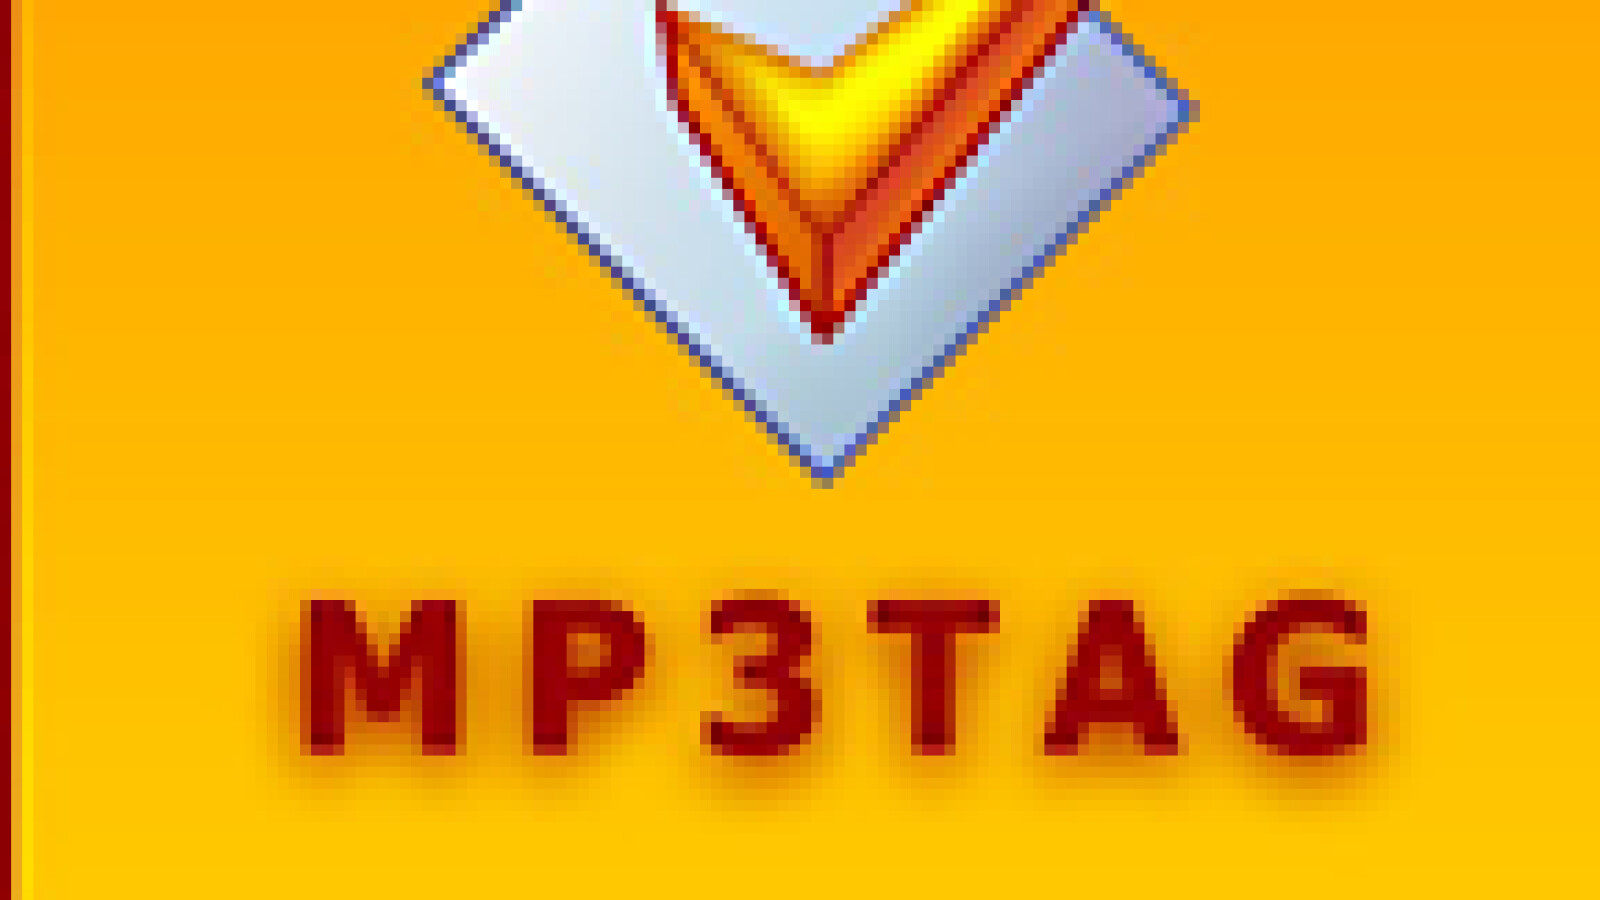 for windows download Mp3tag 3.22a